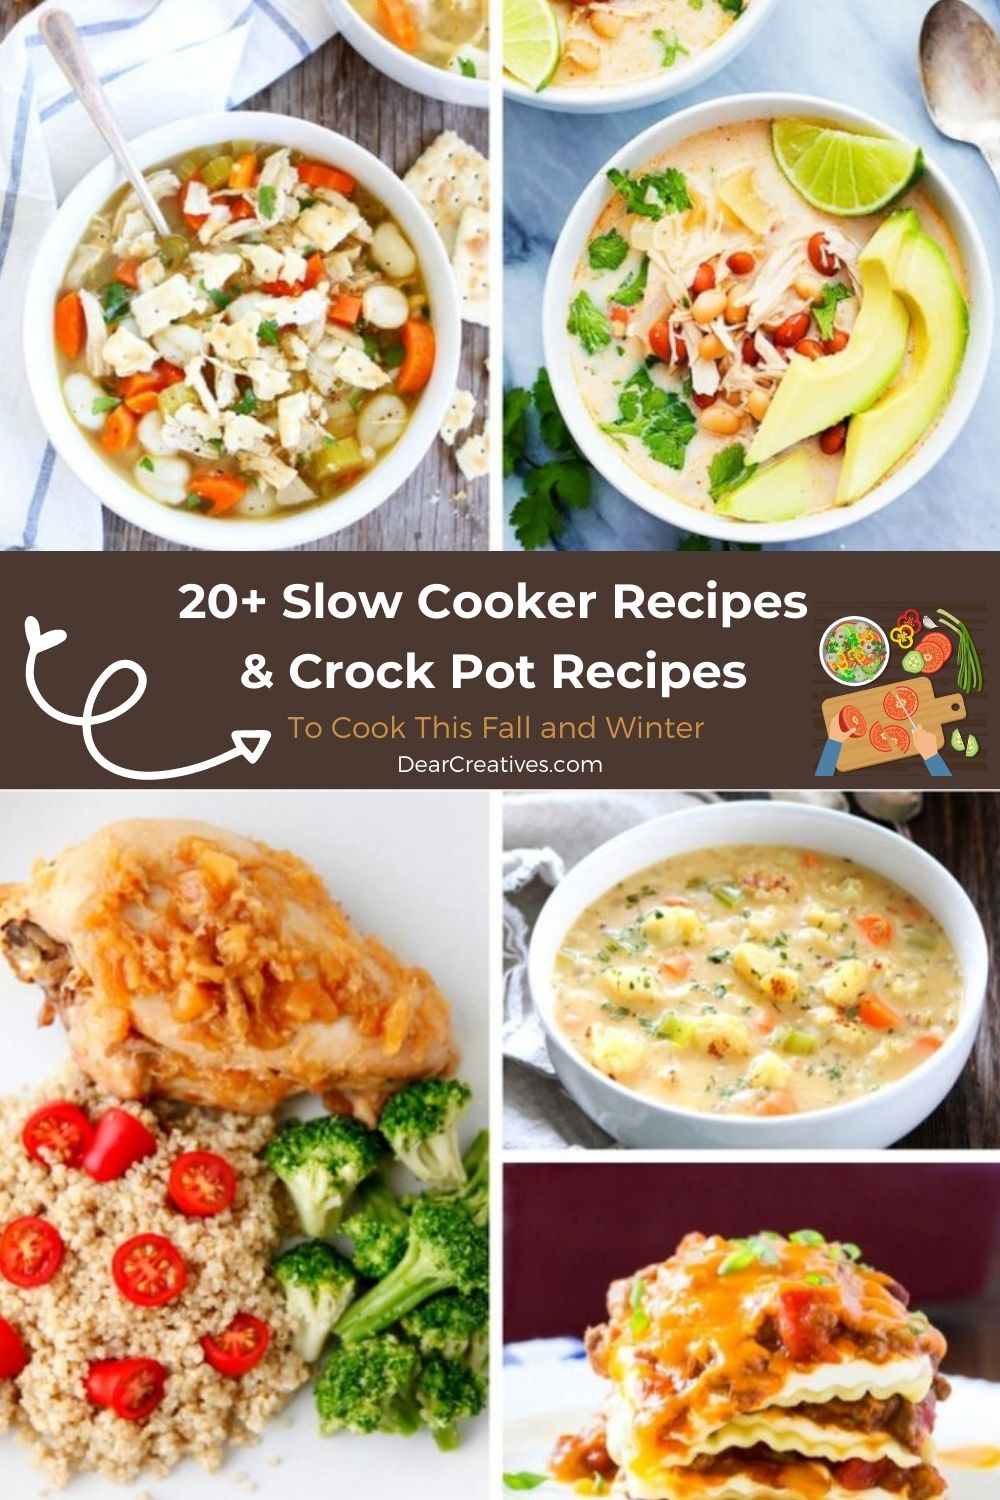 20+Slow Cooker Recipes Perfect For Fall, Winter...